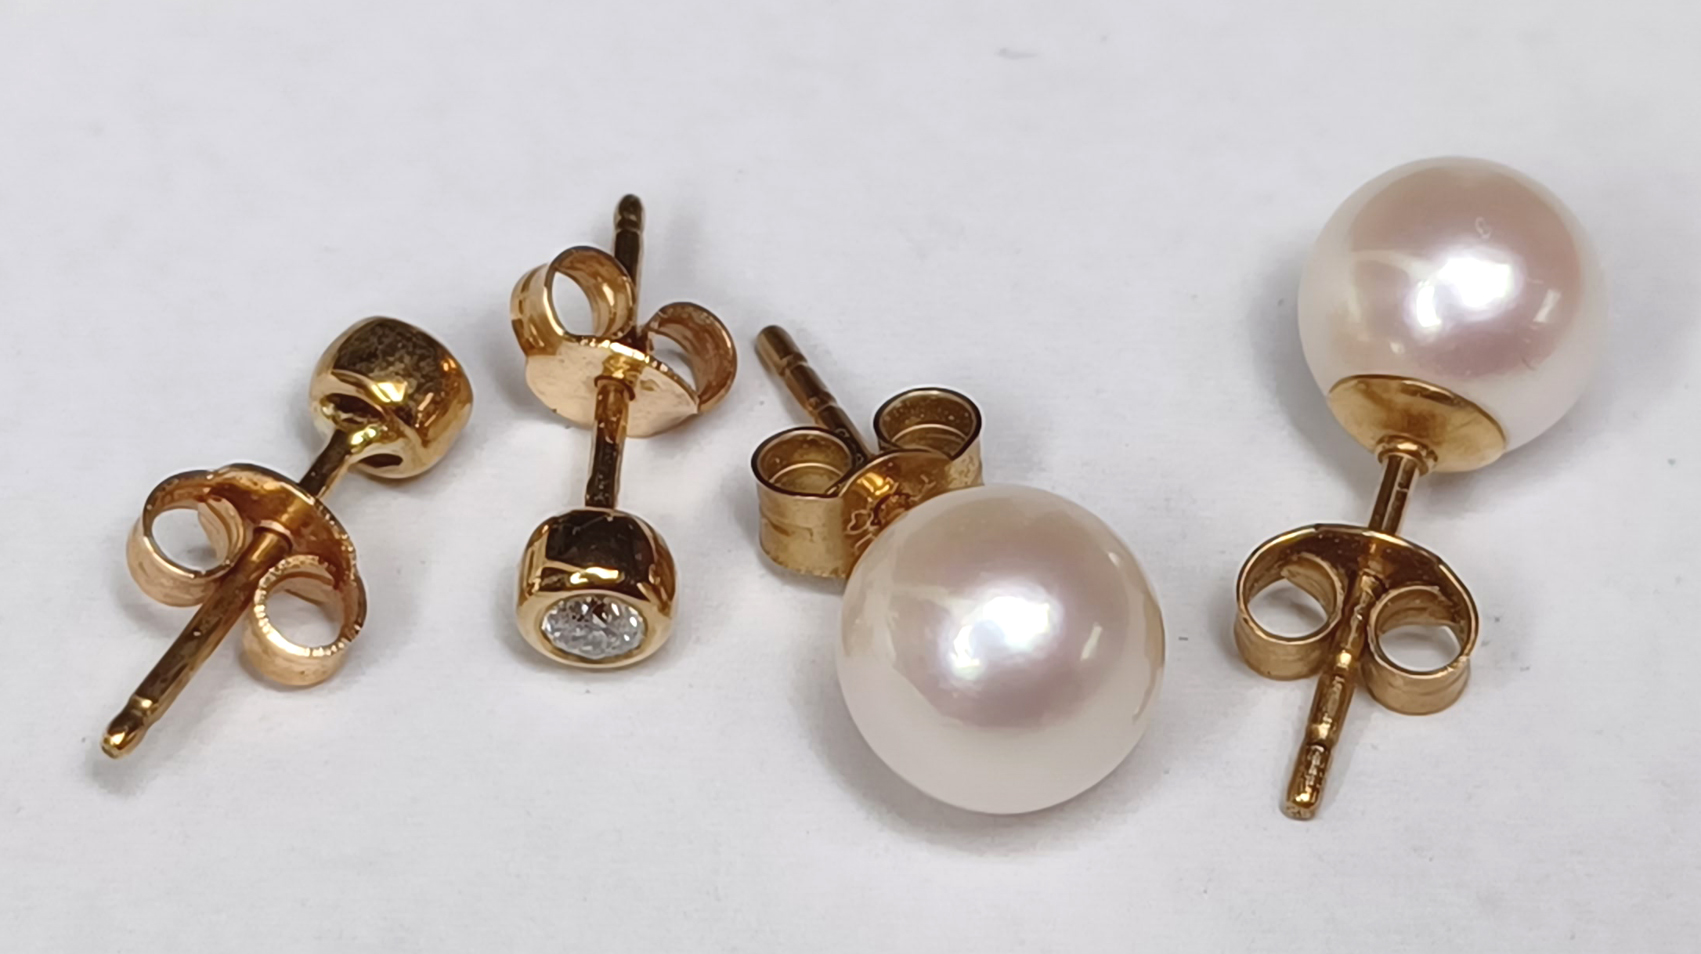 9CT GOLD PEARL EARRINGS, AND DIAMOND STUD EARRINGS HALLMARK 375 ON BUTTERFLY TOTAL WEIGHT 2.5g - Image 2 of 2